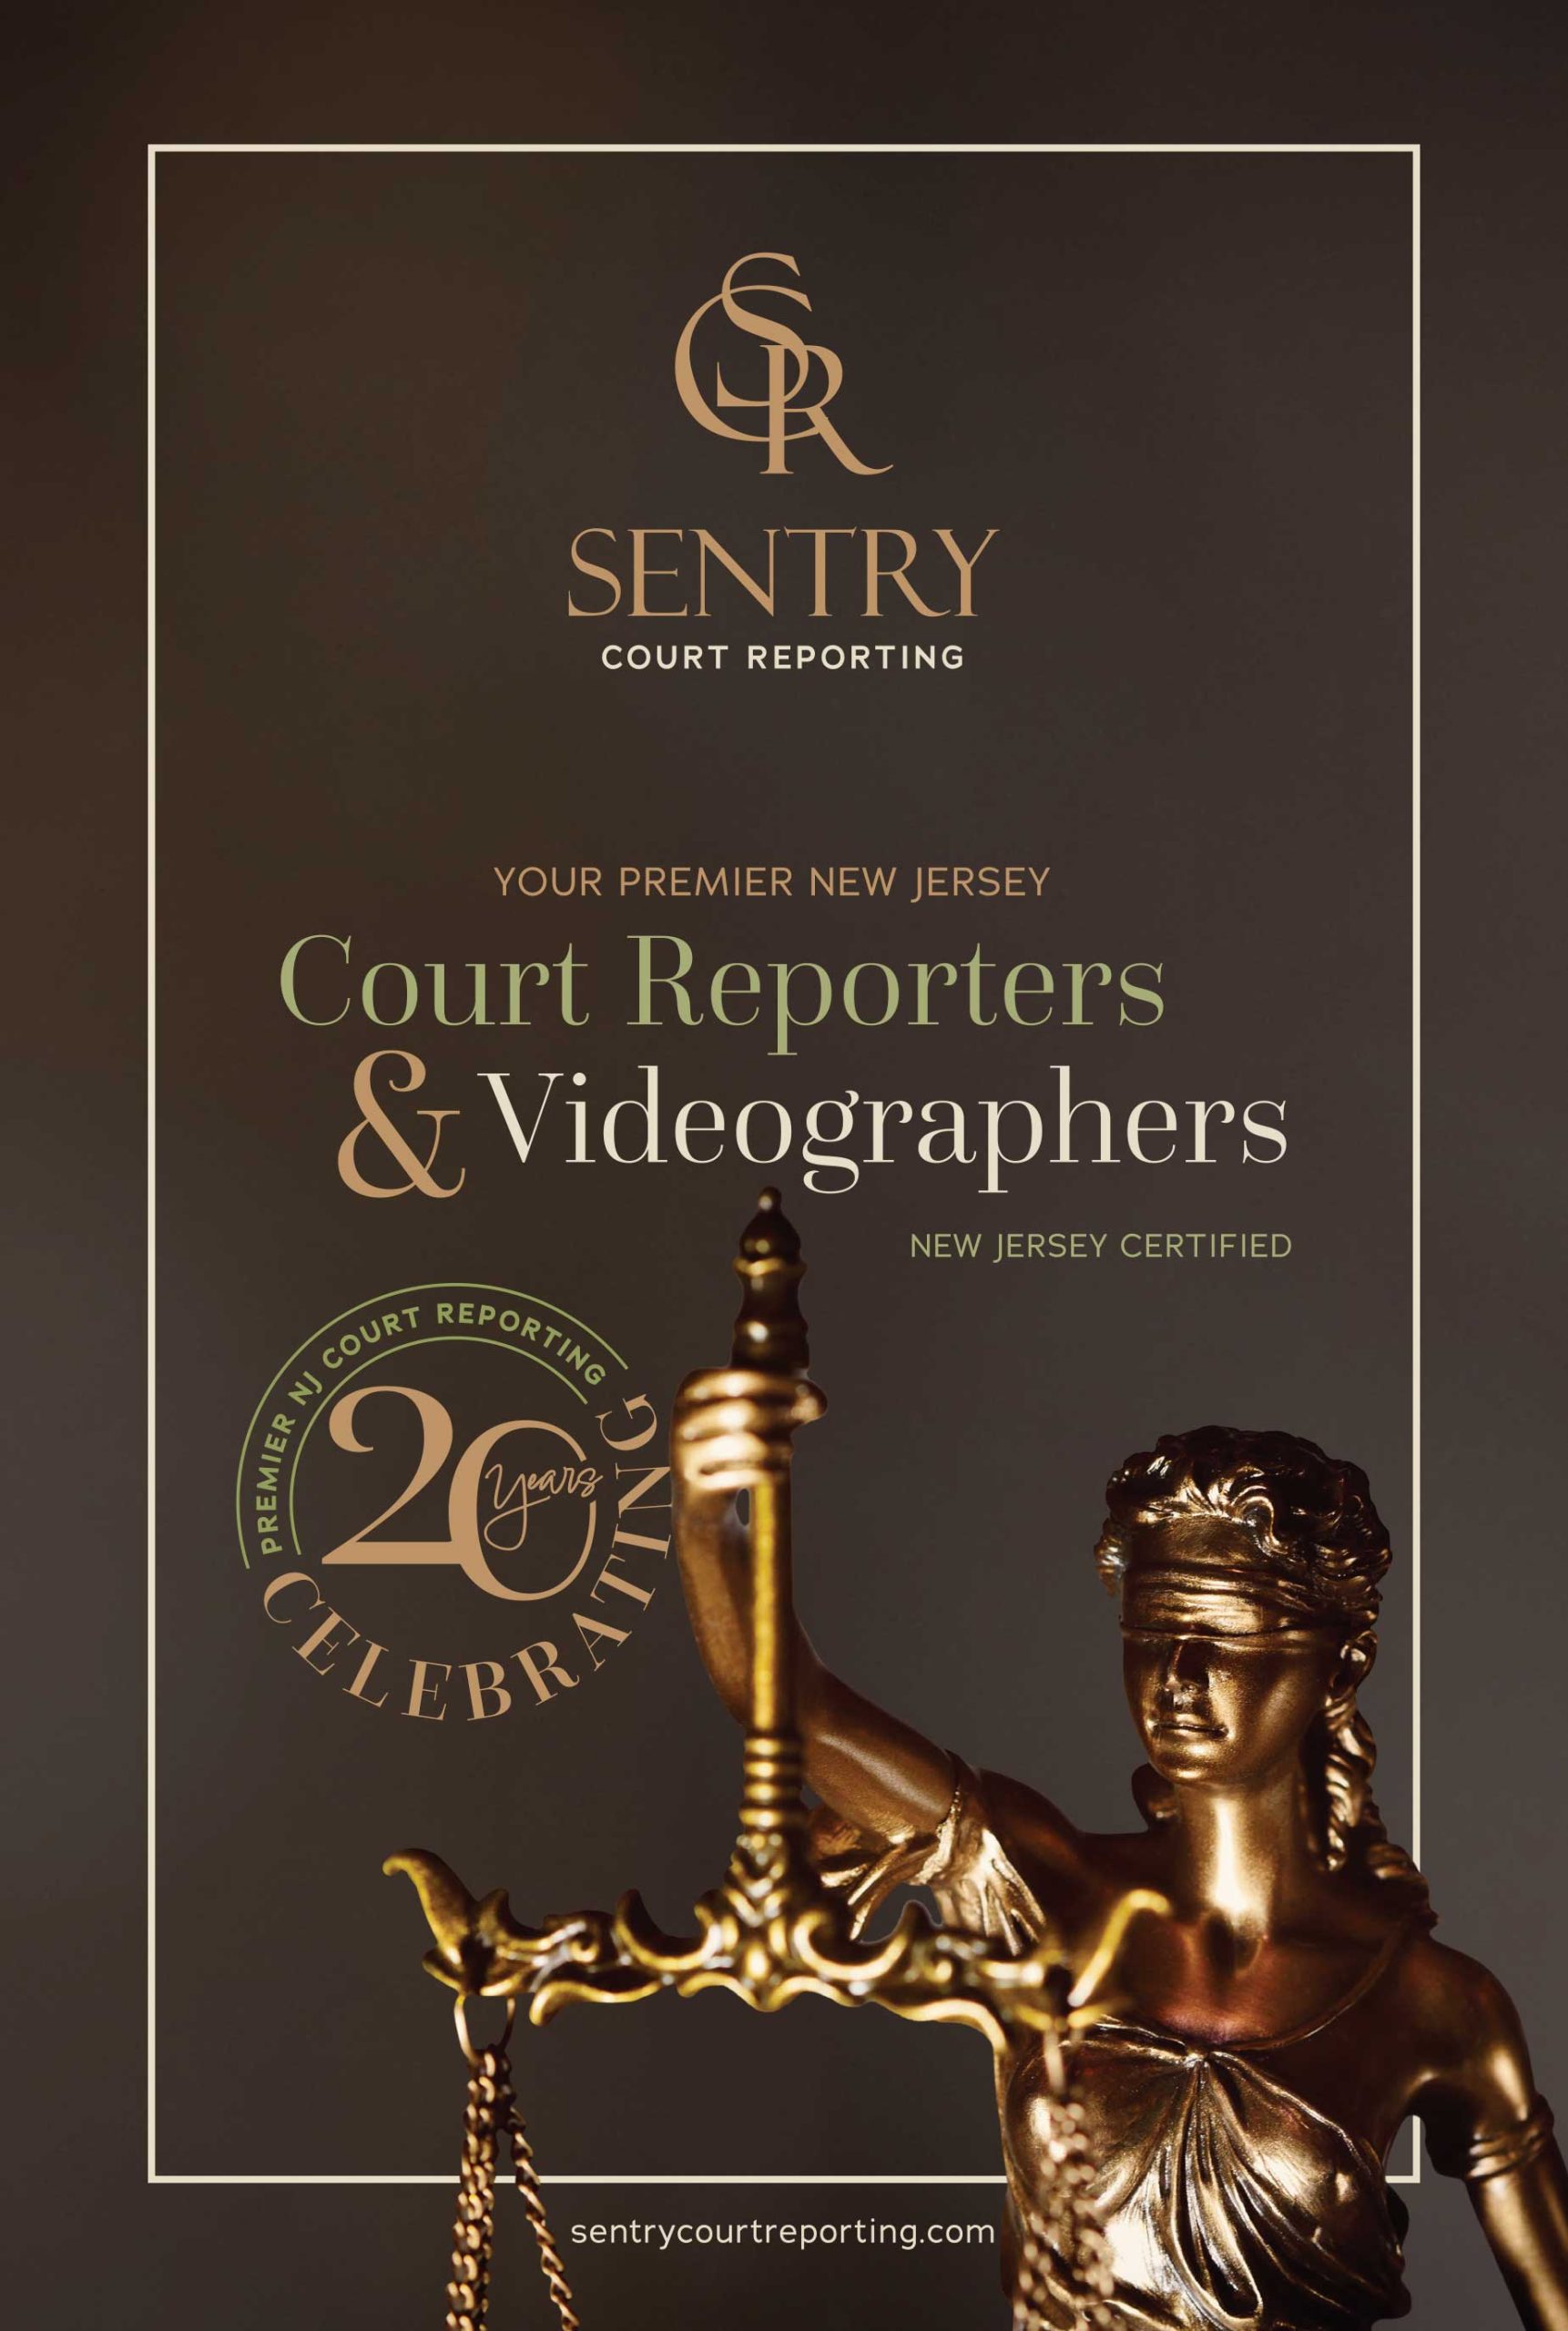 Sentry Court Reporting Postcard Side 1